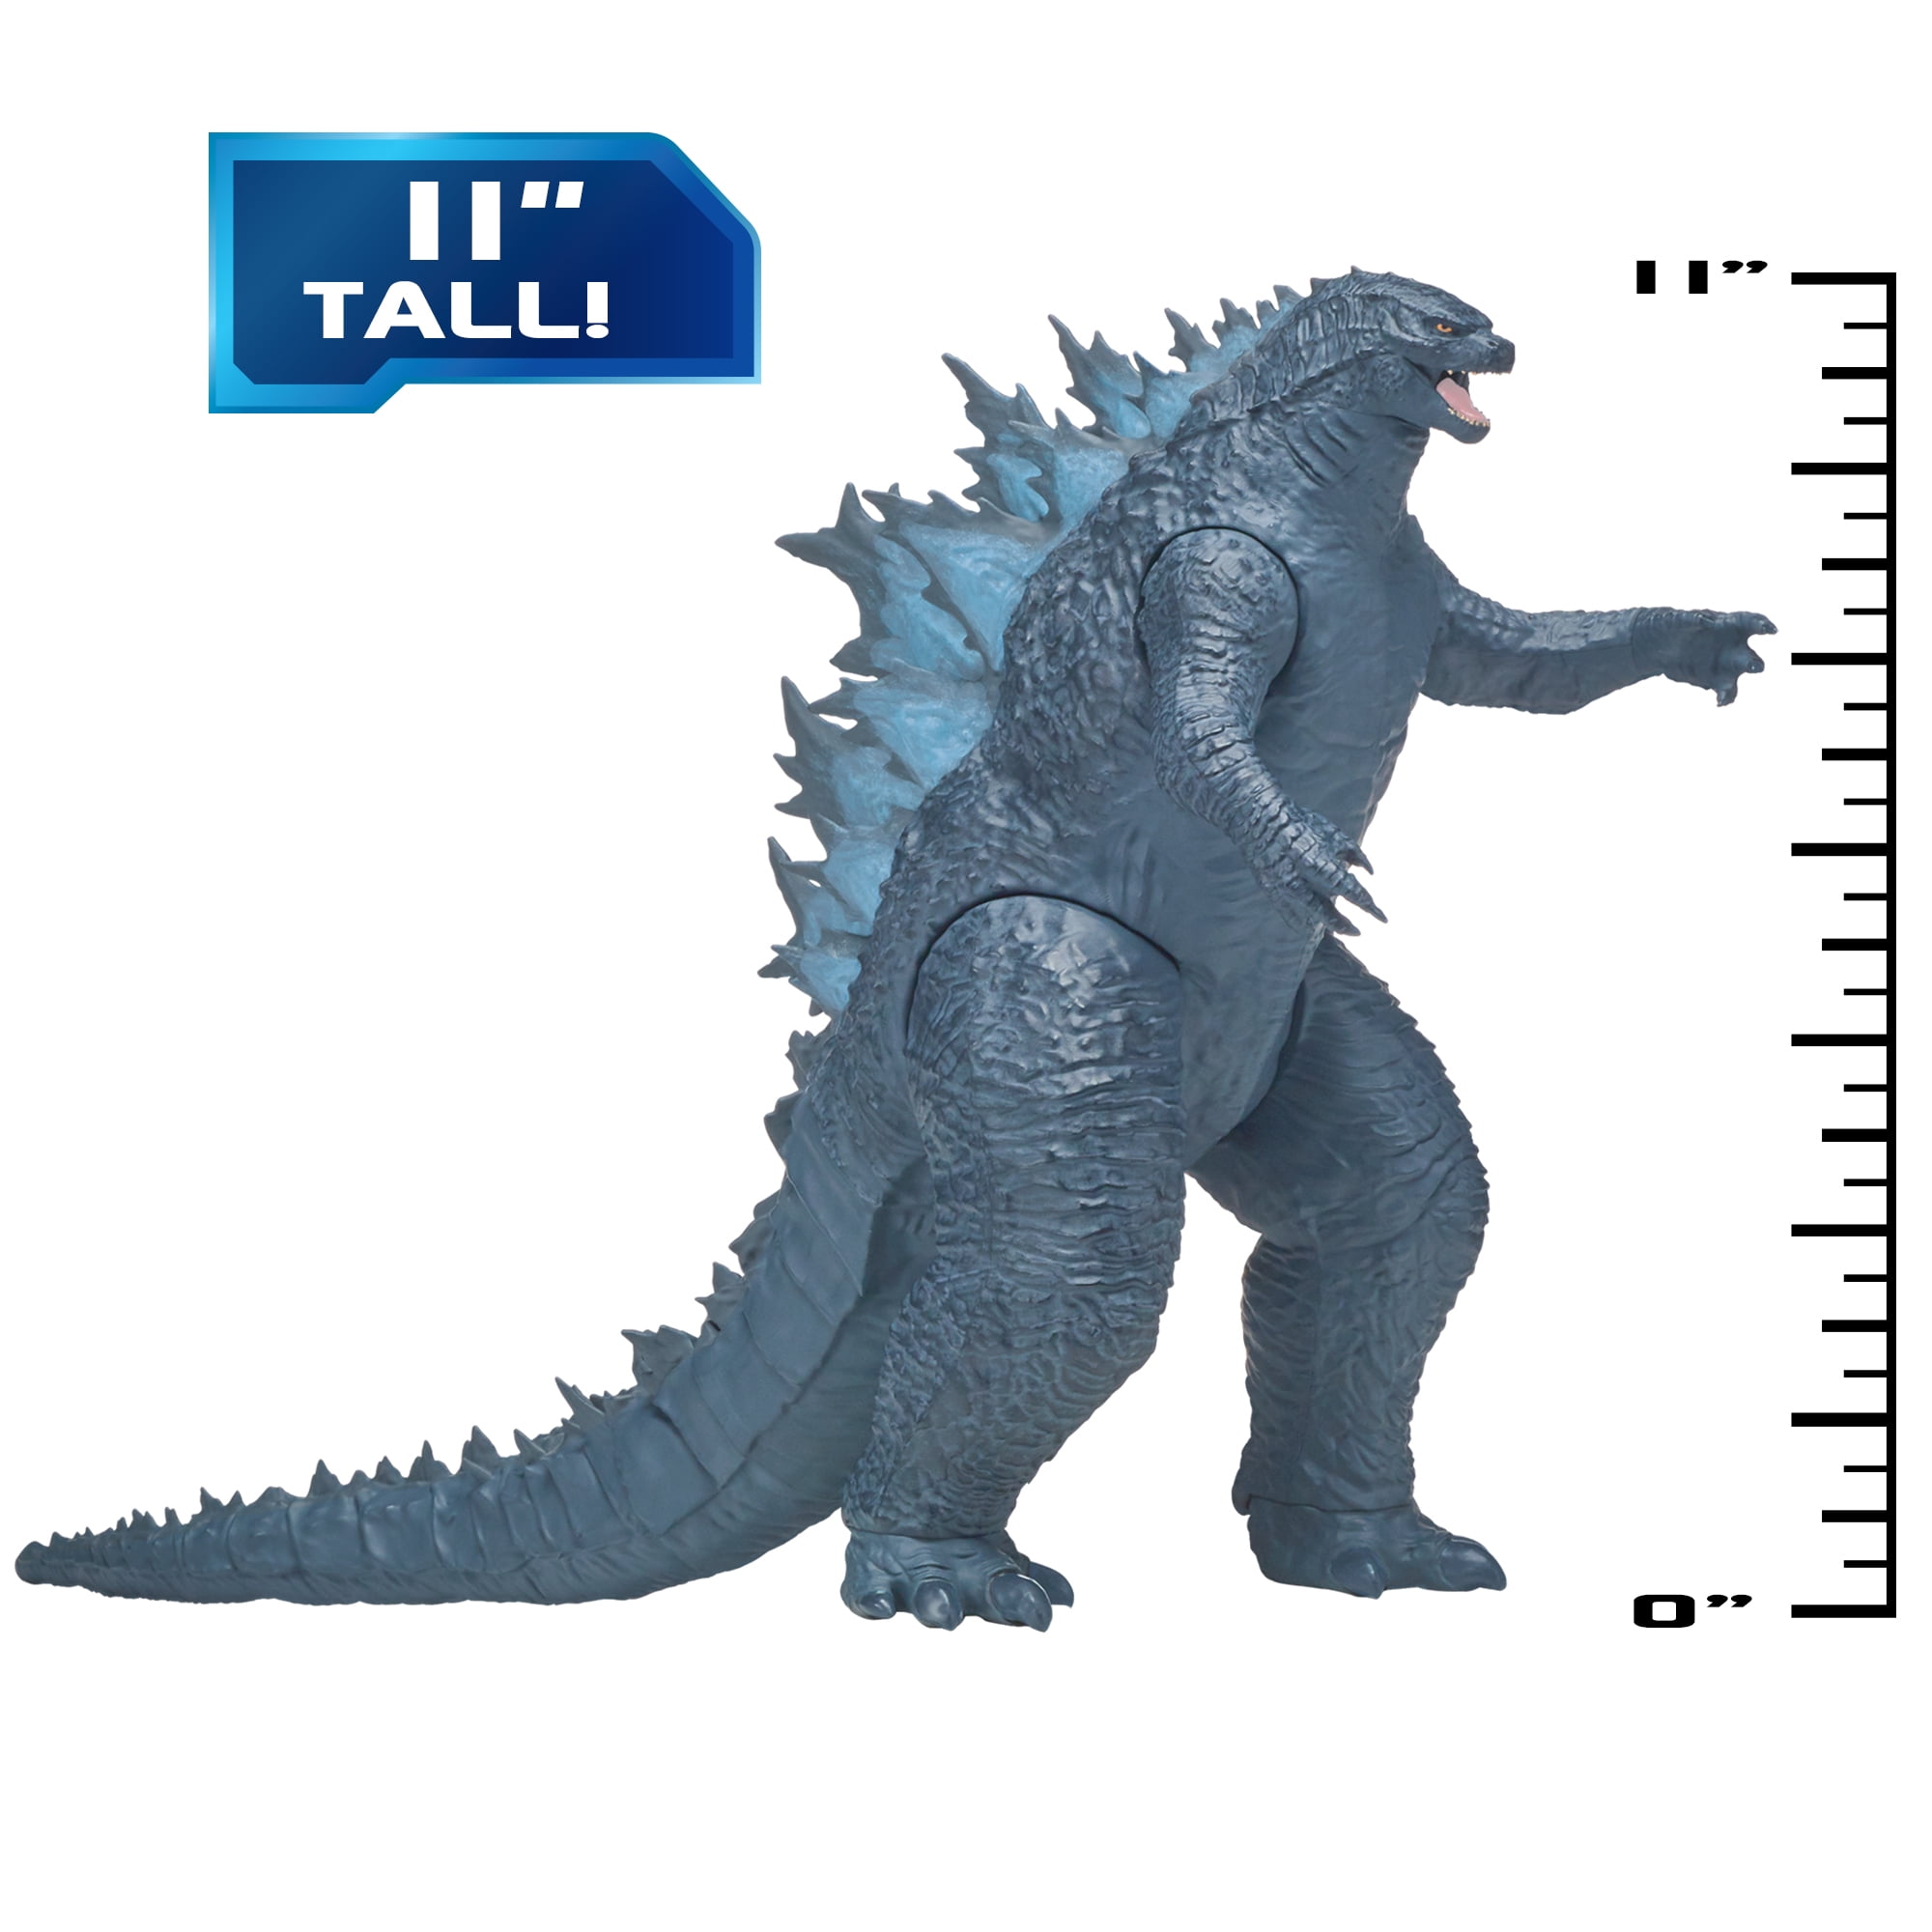 Details about   GODZILLA vs KONG GIANT GODZILLA & GIANT KONG FIGURES **NEW RELEASES** 